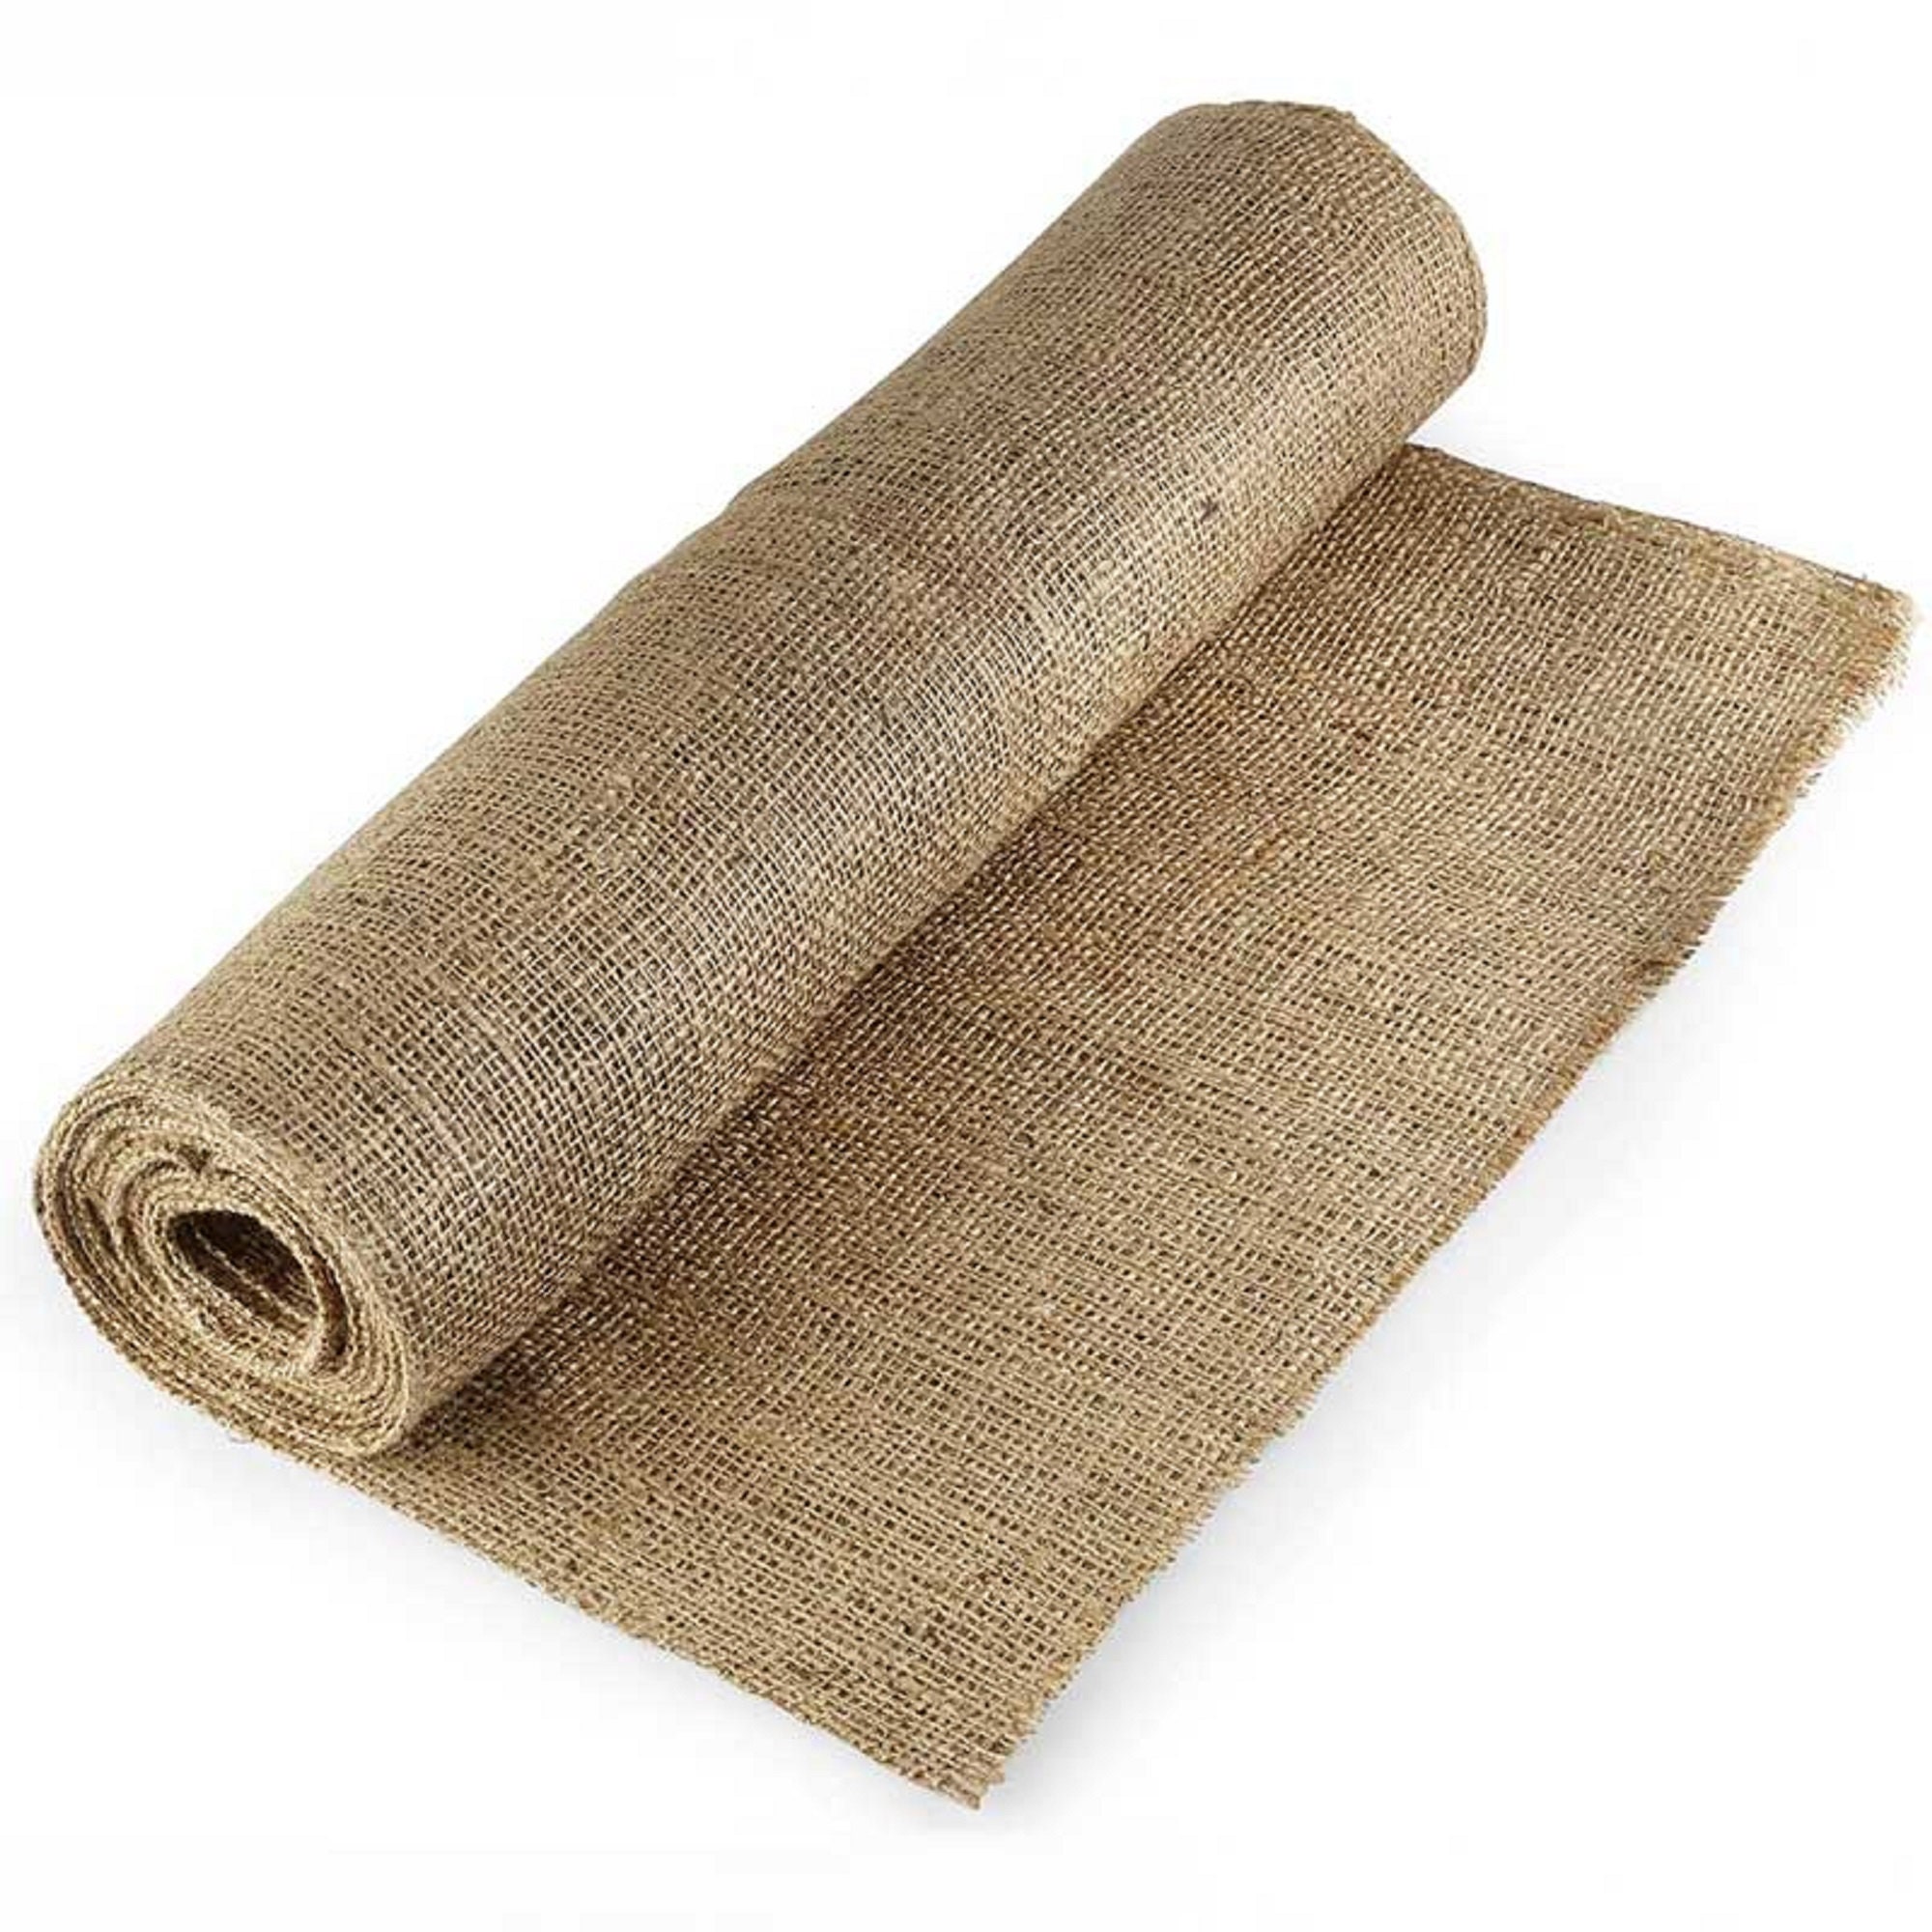 Natural Jute Burlap Hessian Cloth Lining Fabric Rustic Wedding Sheet Sack  Material, Arts & Craft, By The Metre - 183cm or 101cm width